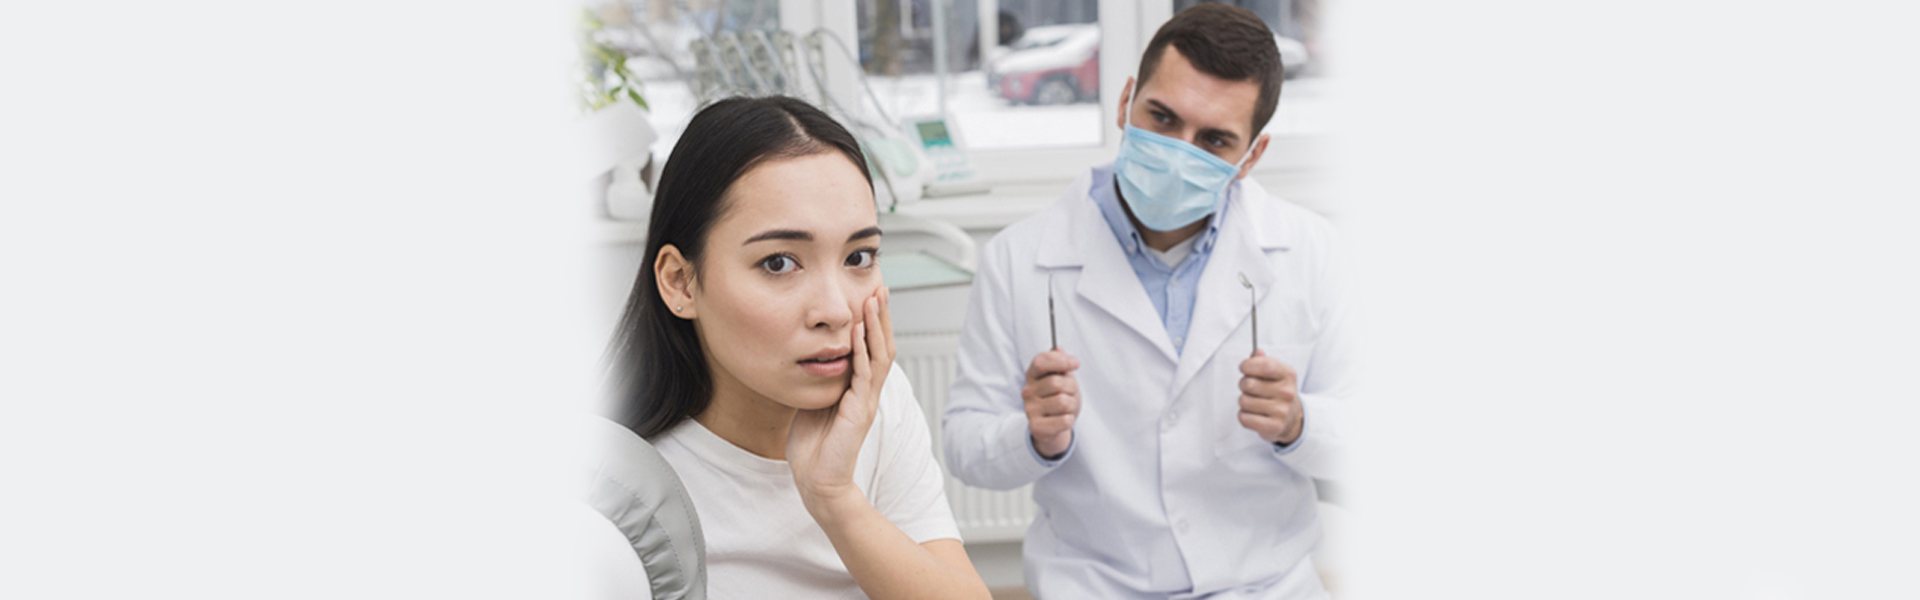 How to Choose an Emergency Dentist Near You: Factors to Consider